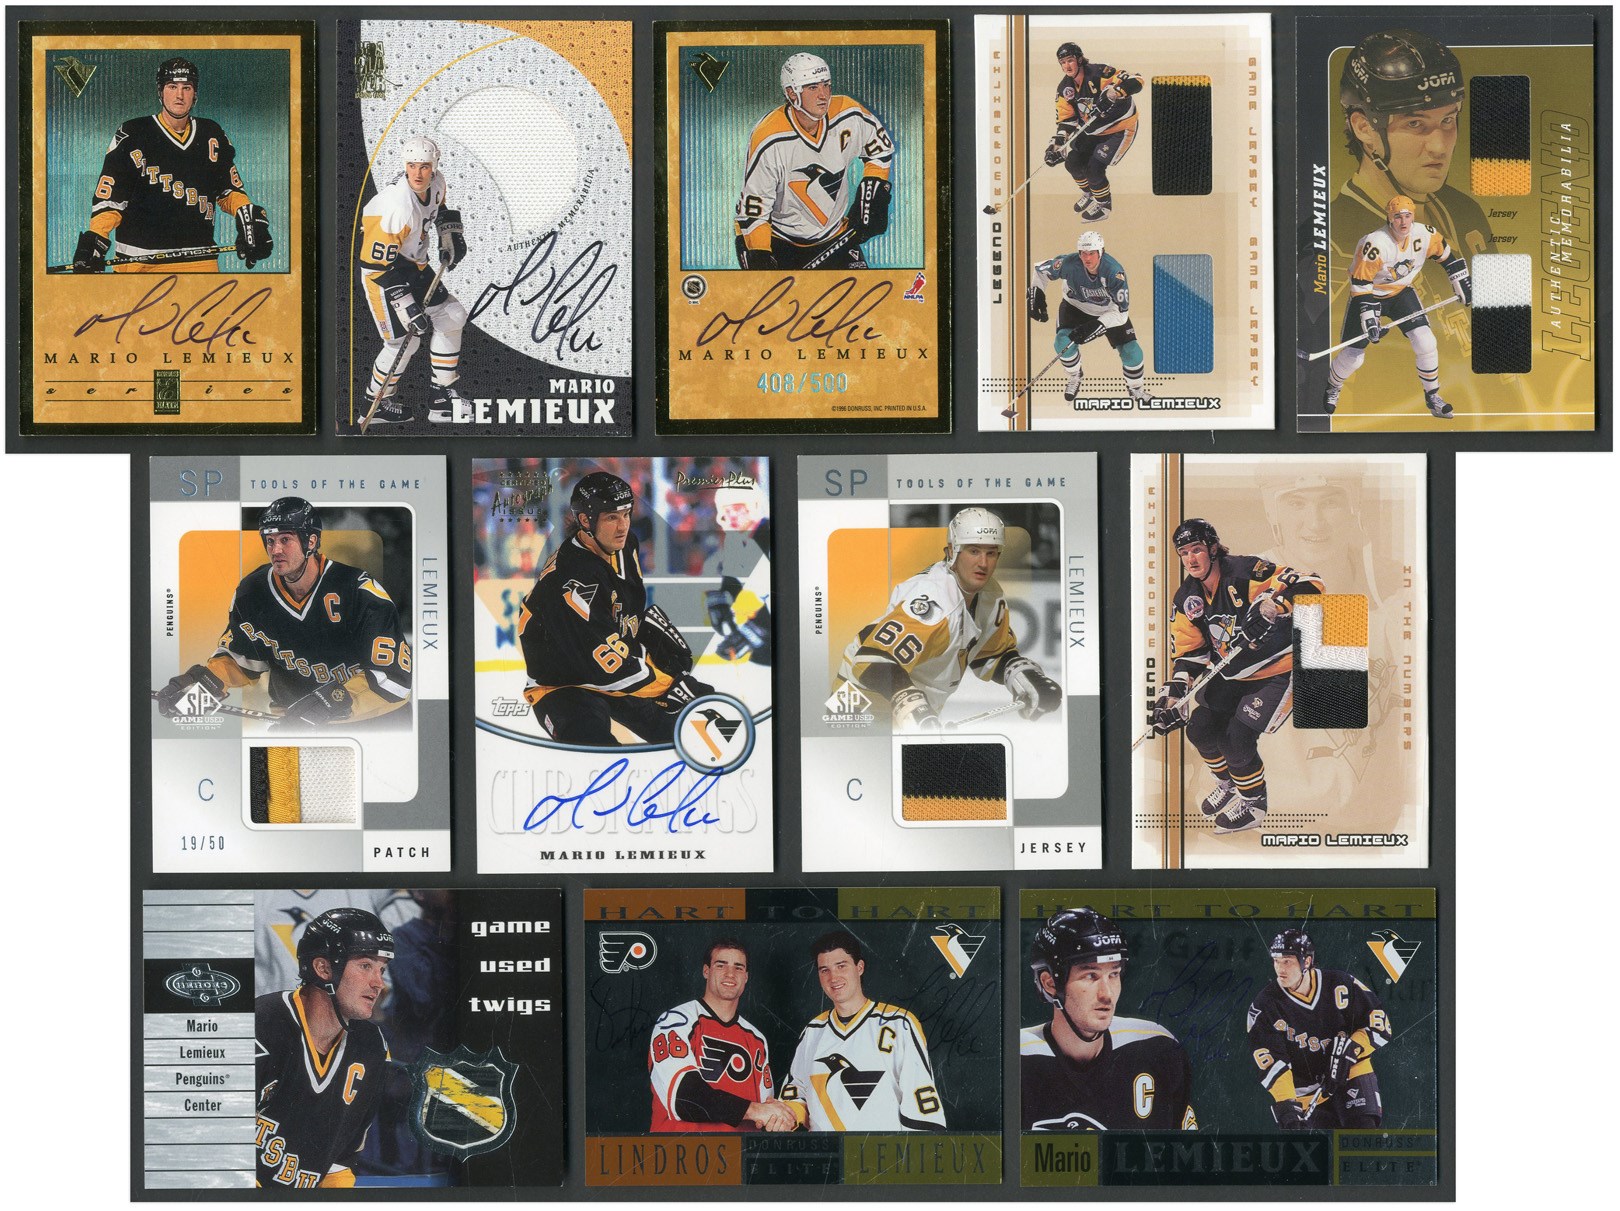 Baseball and Trading Cards - 1990s-2000s Mario Lemieux Modern Insert Game Worn & Autograph Collection (25+)